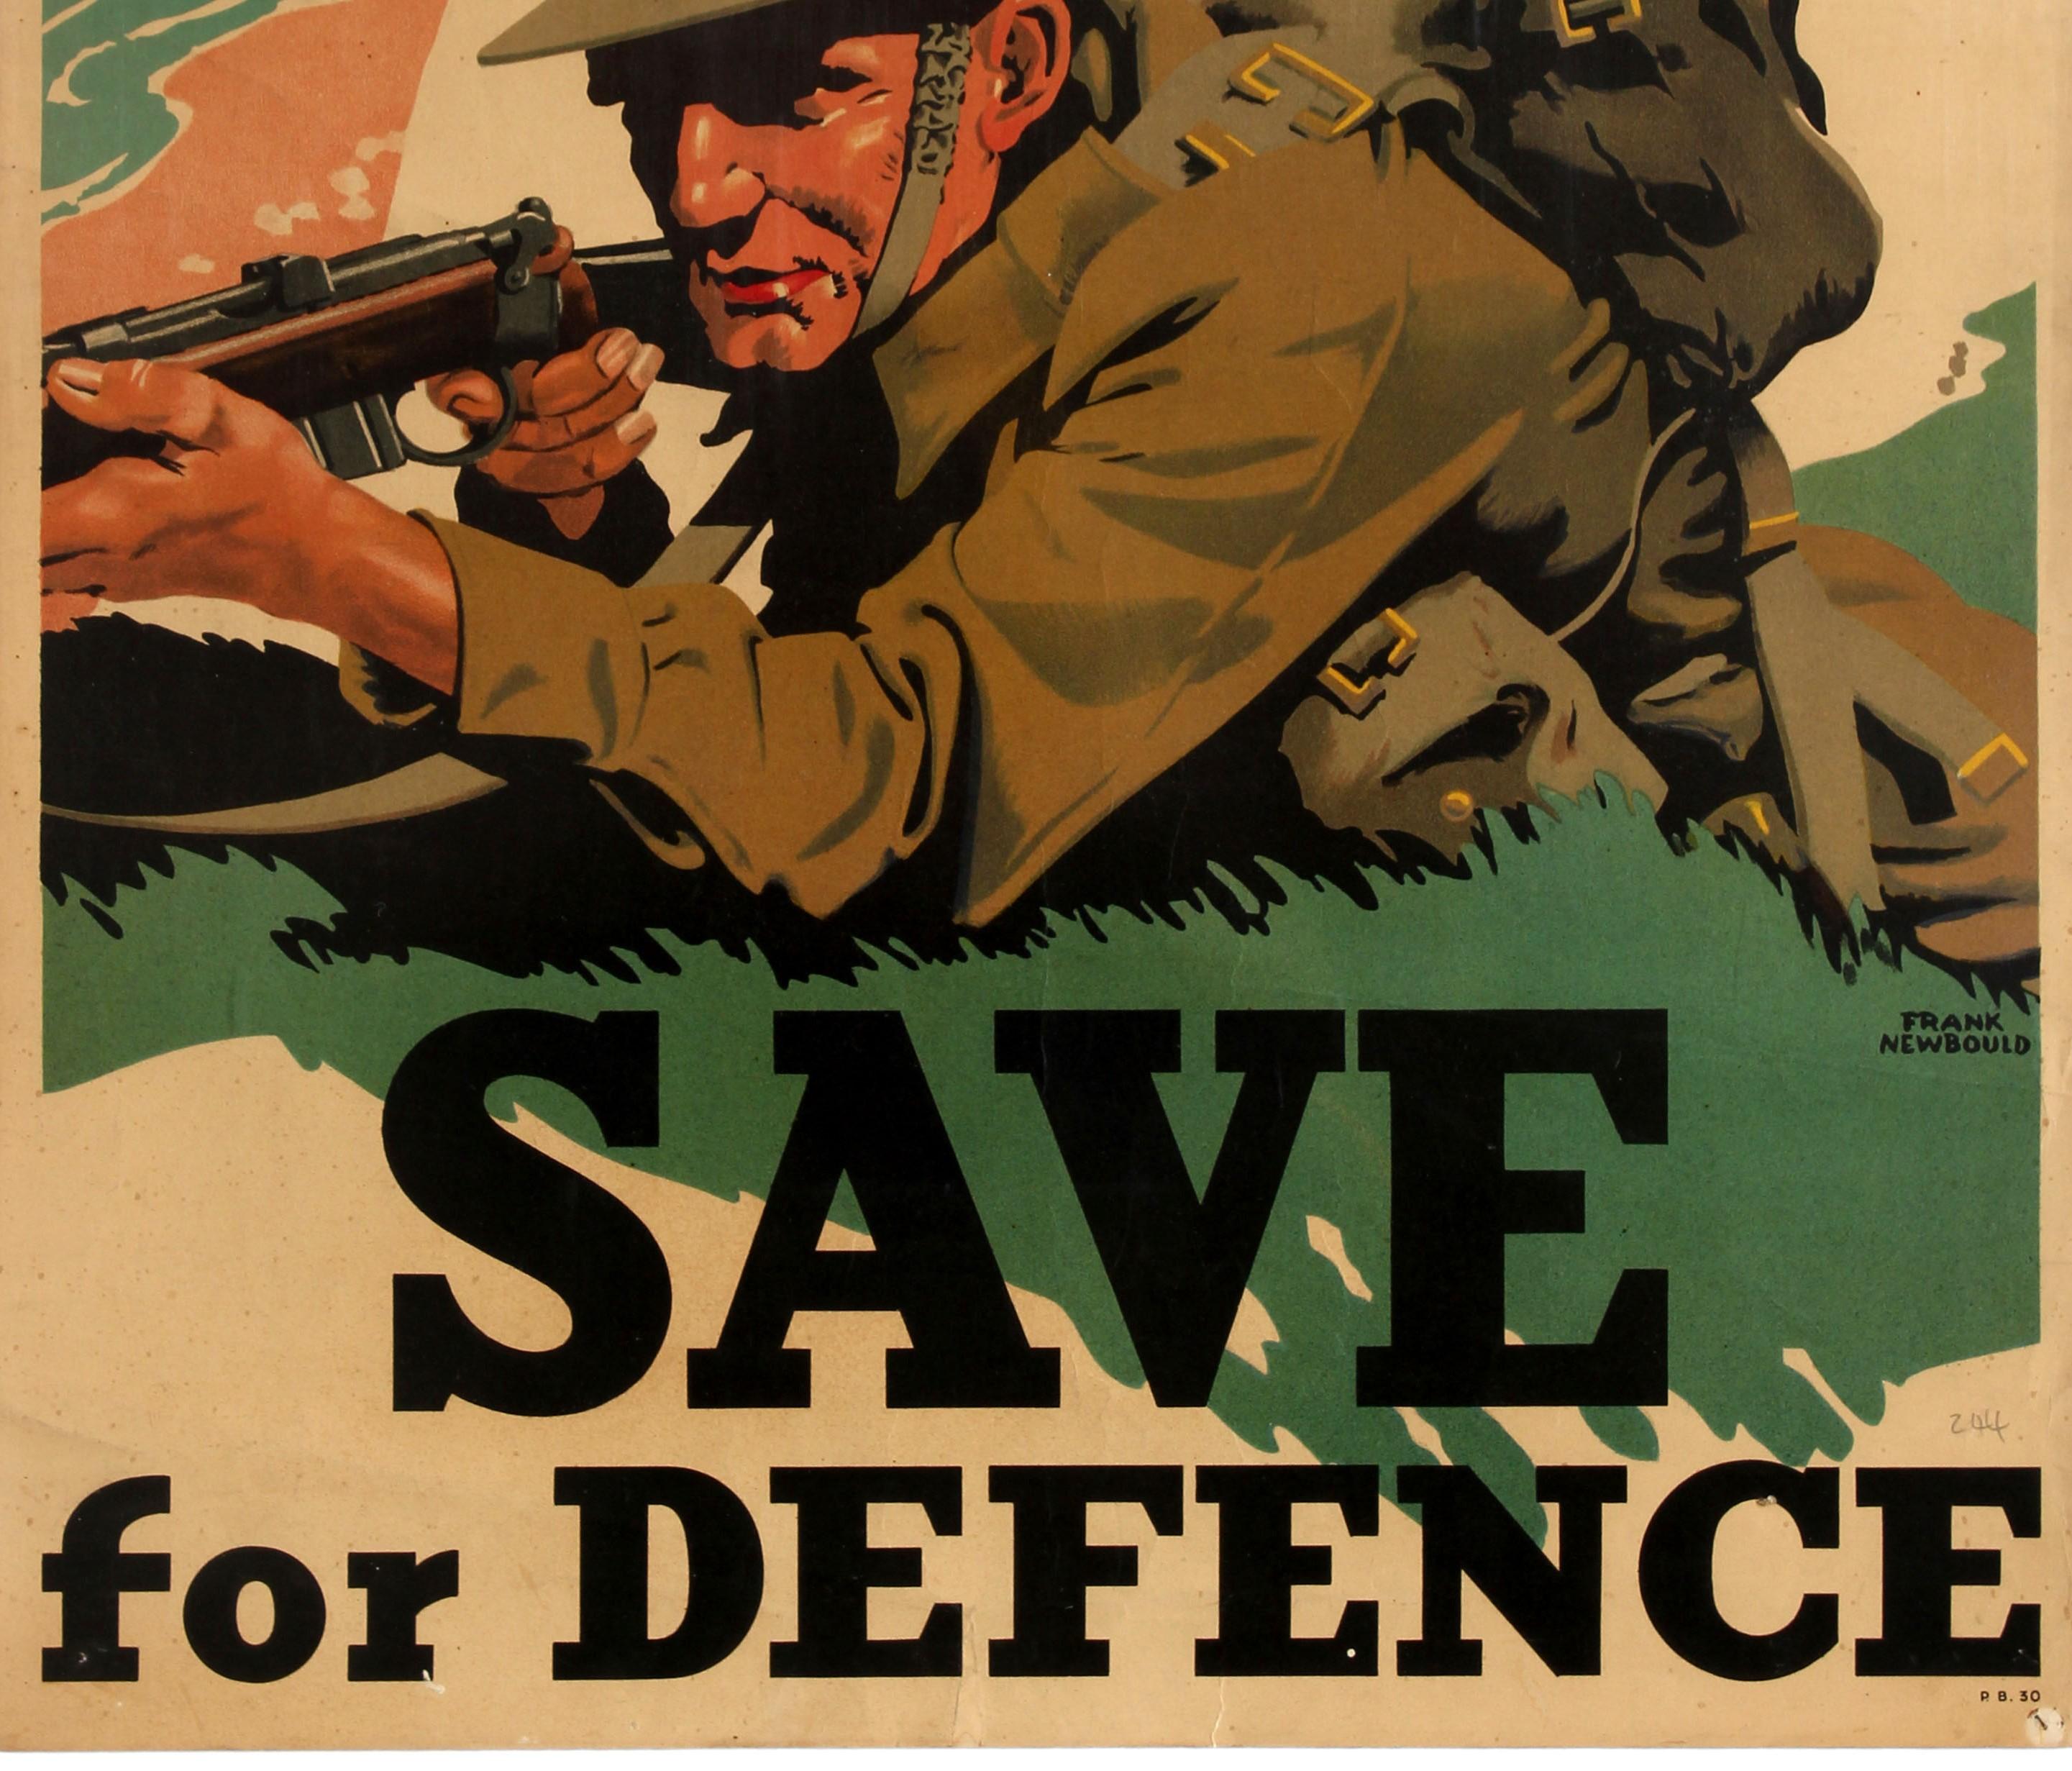 wwii homefront posters